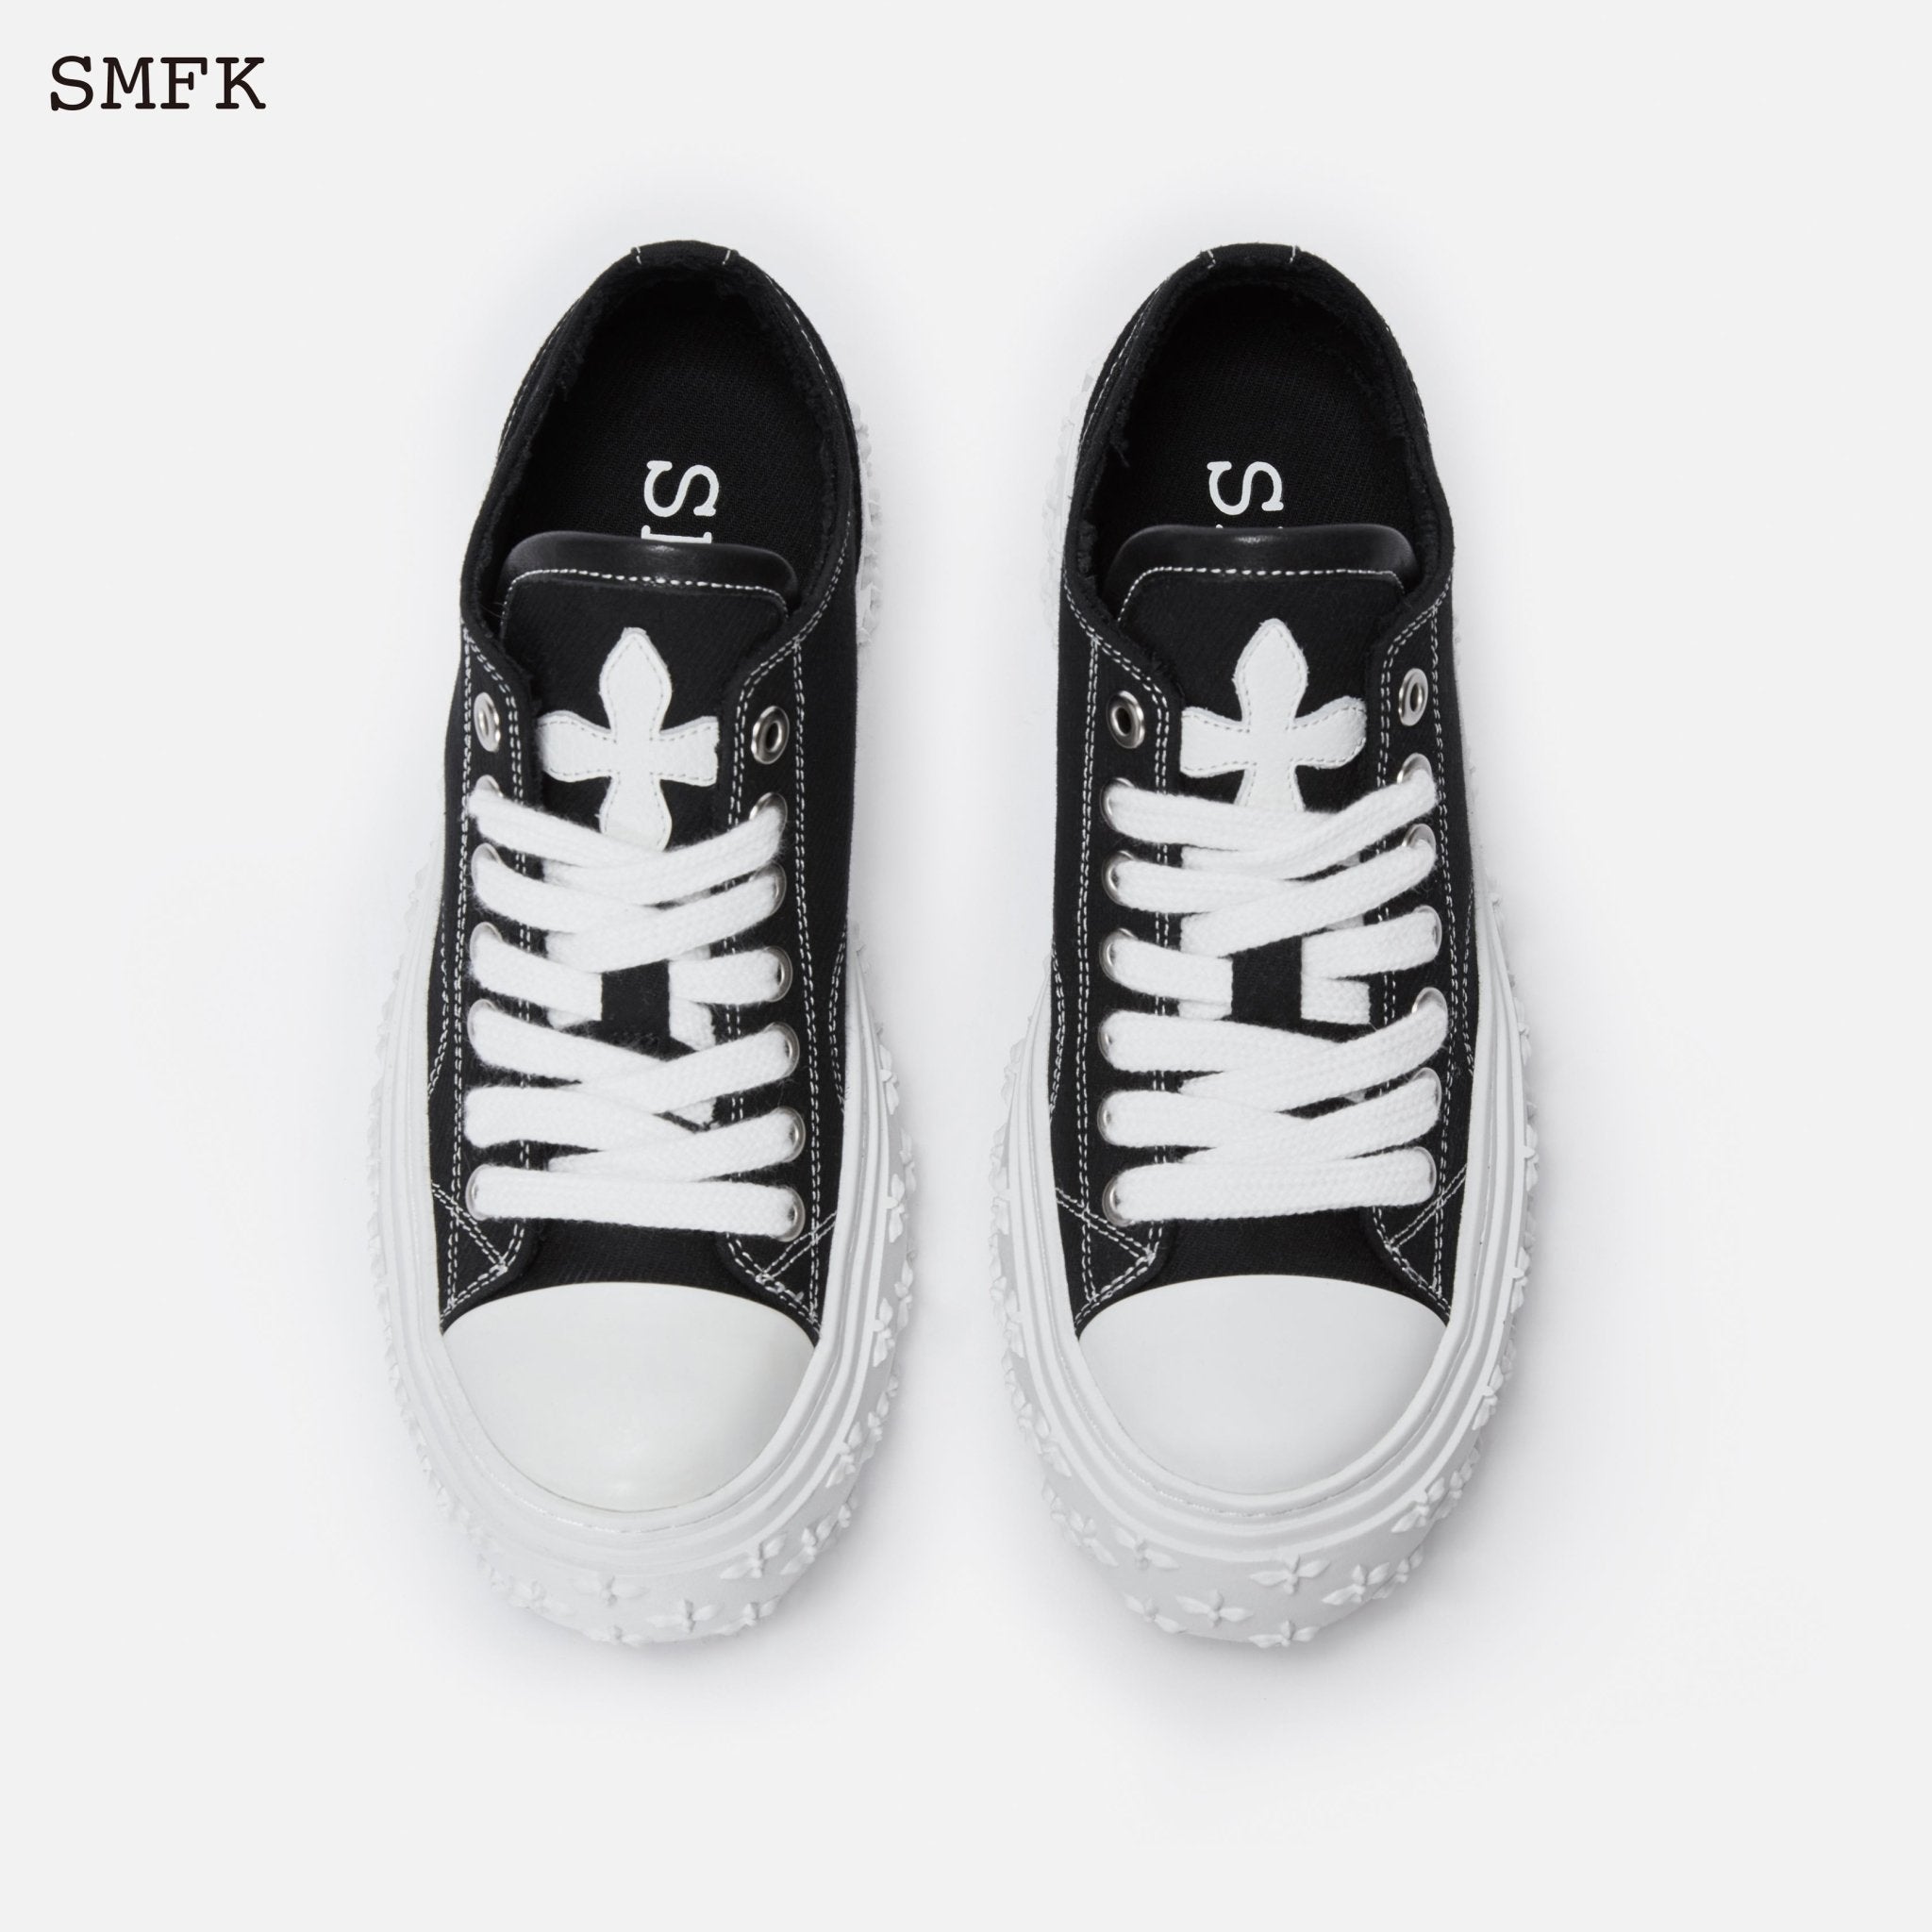 SMFK Garden Vintage Skate Shoes Black And White | MADA IN CHINA